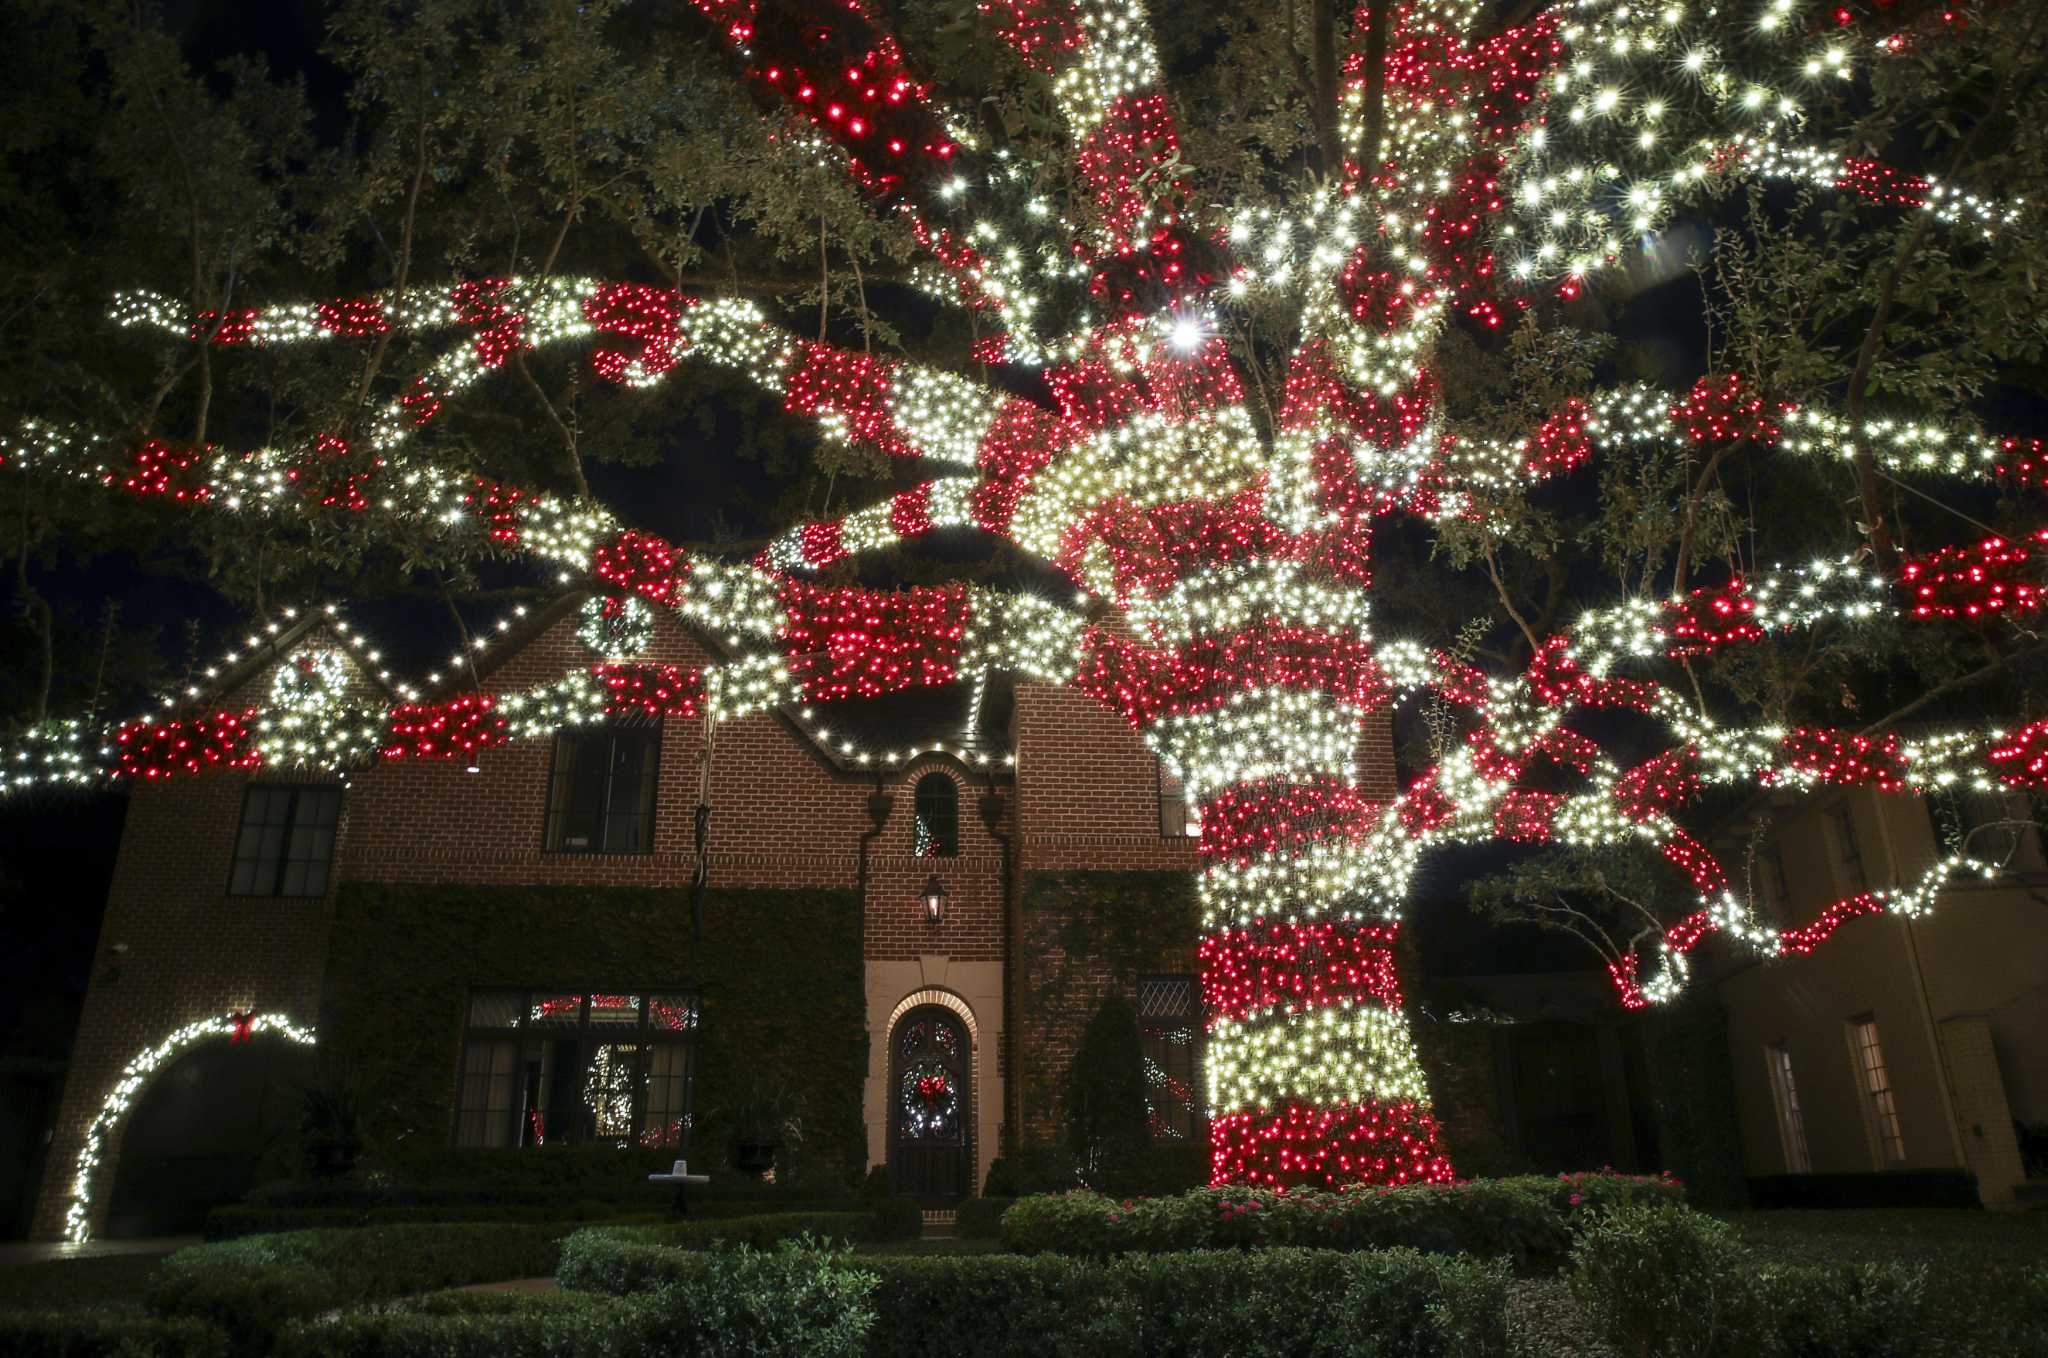 The best neighborhoods to look at Christmas lights in the Houston area